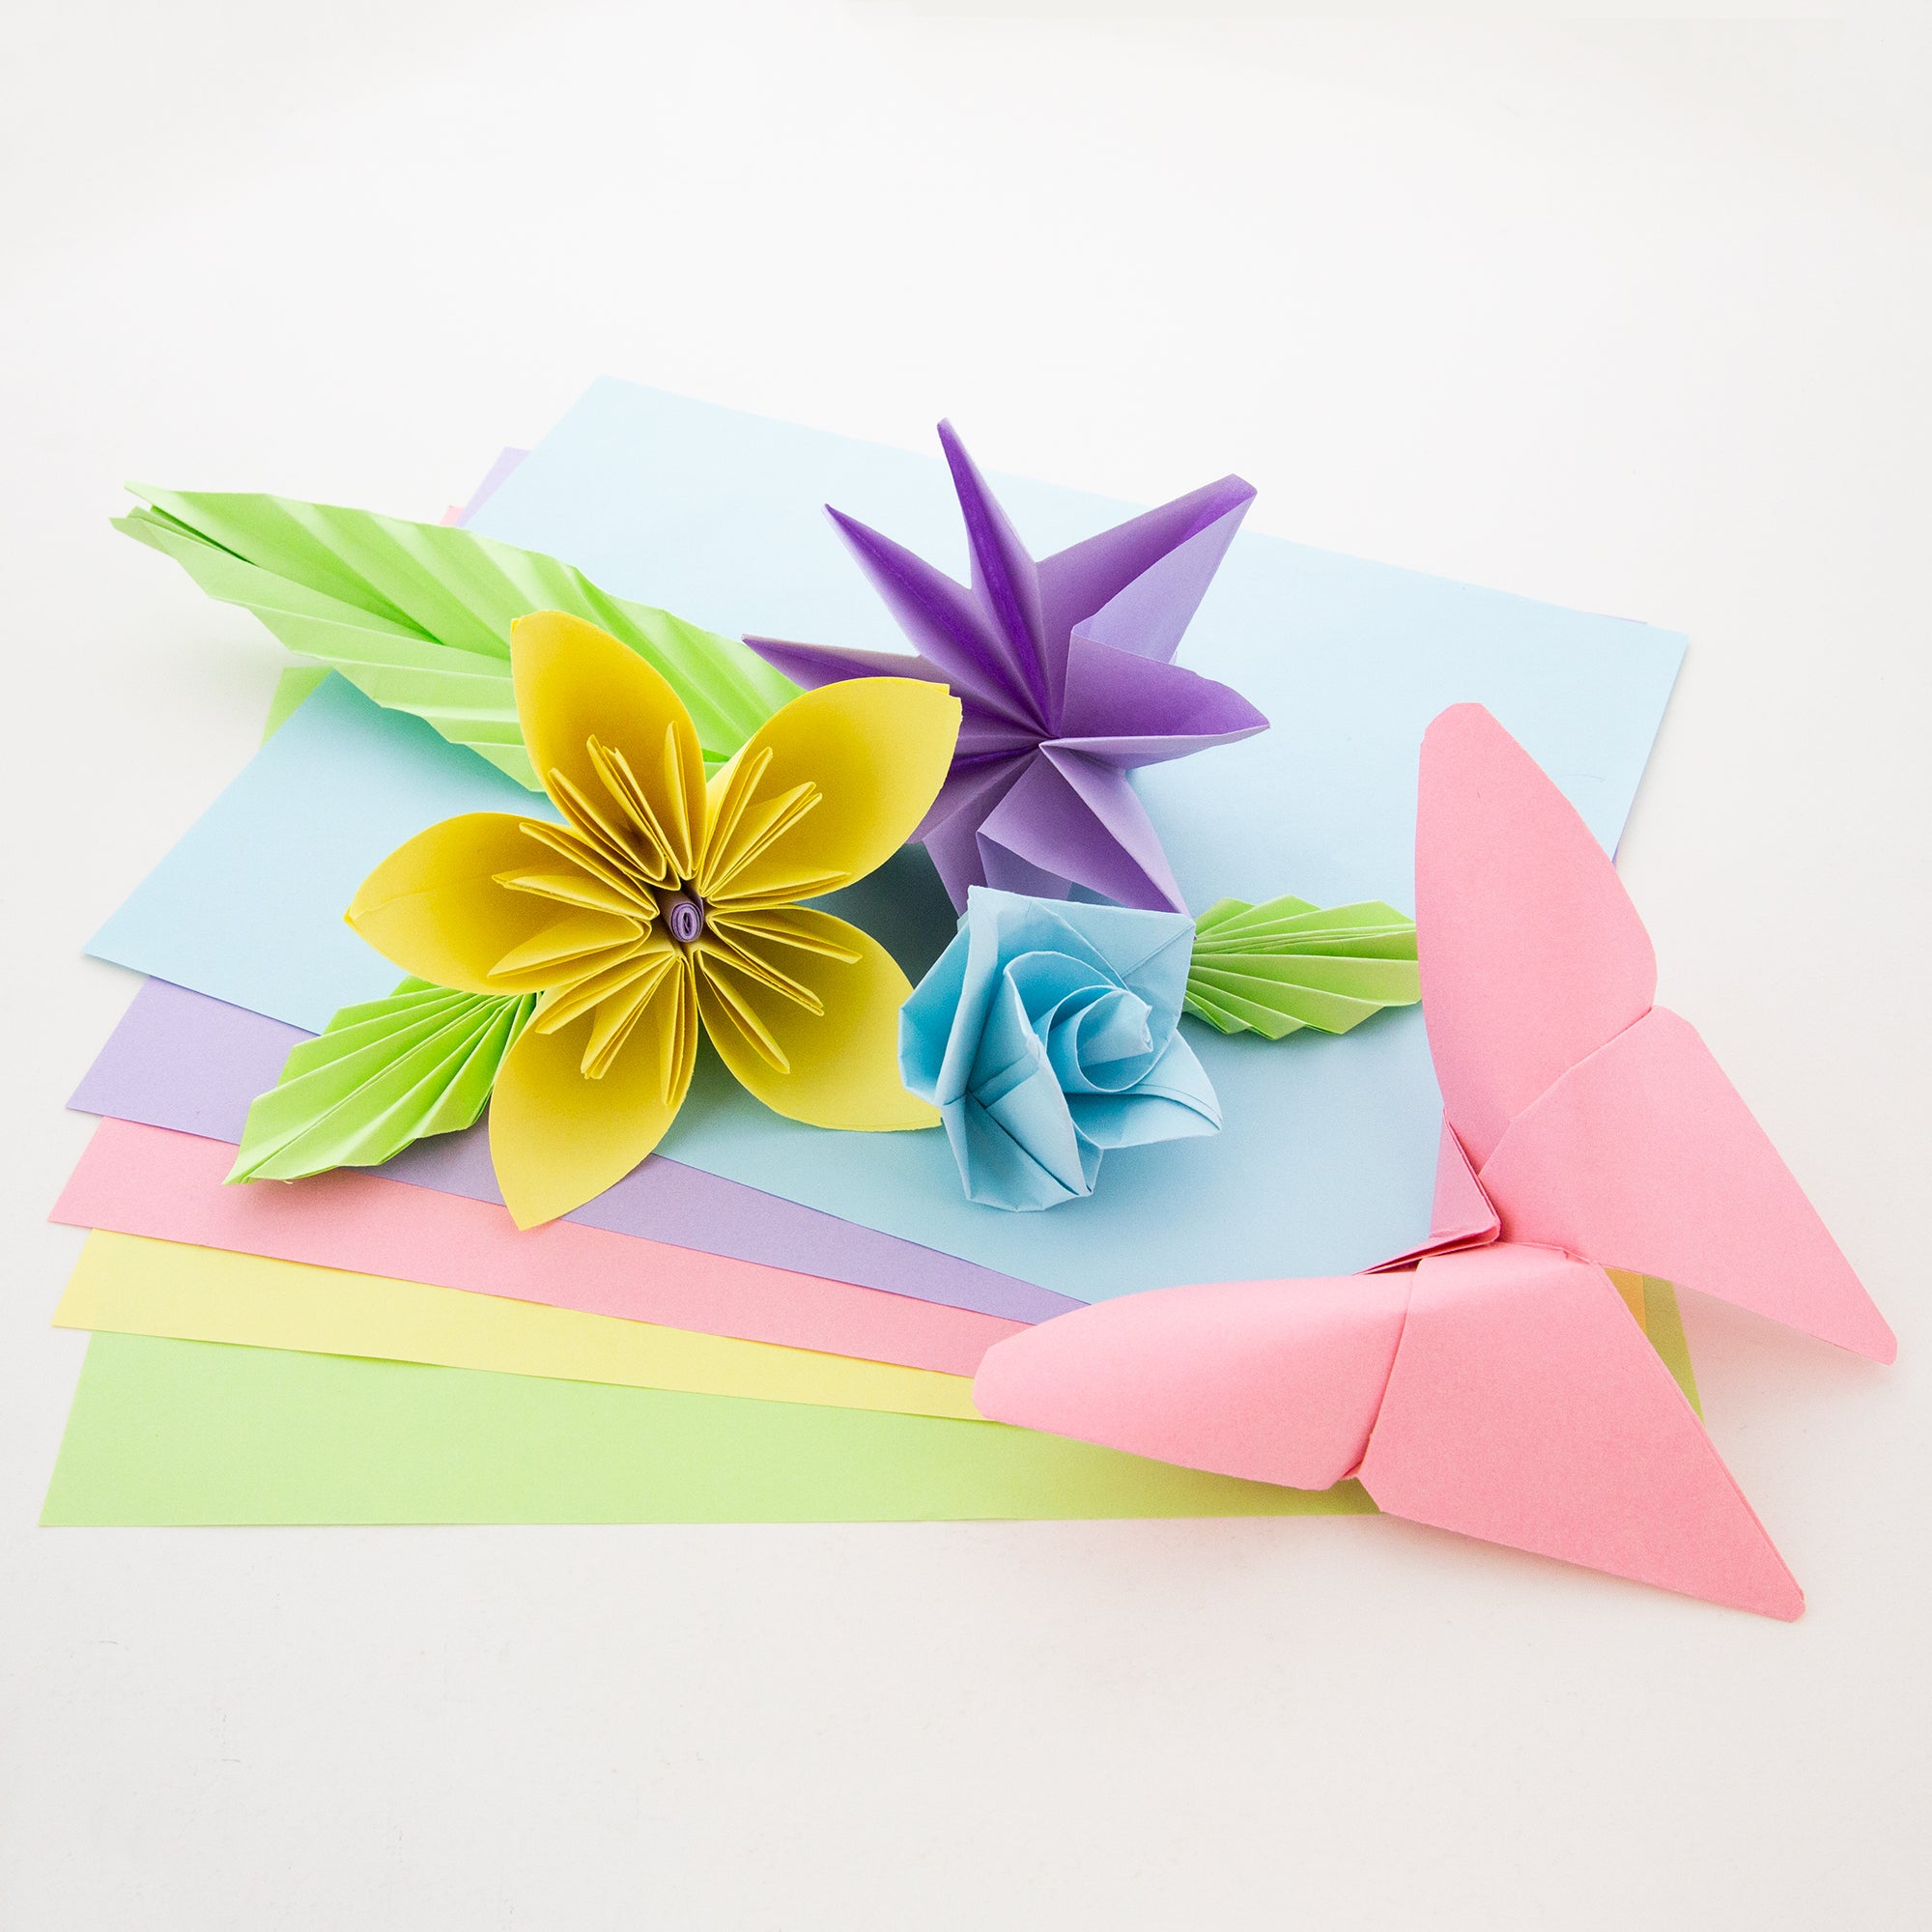 Pastel Colored Paper SHORT - 250 sheets per ream - assorted colors